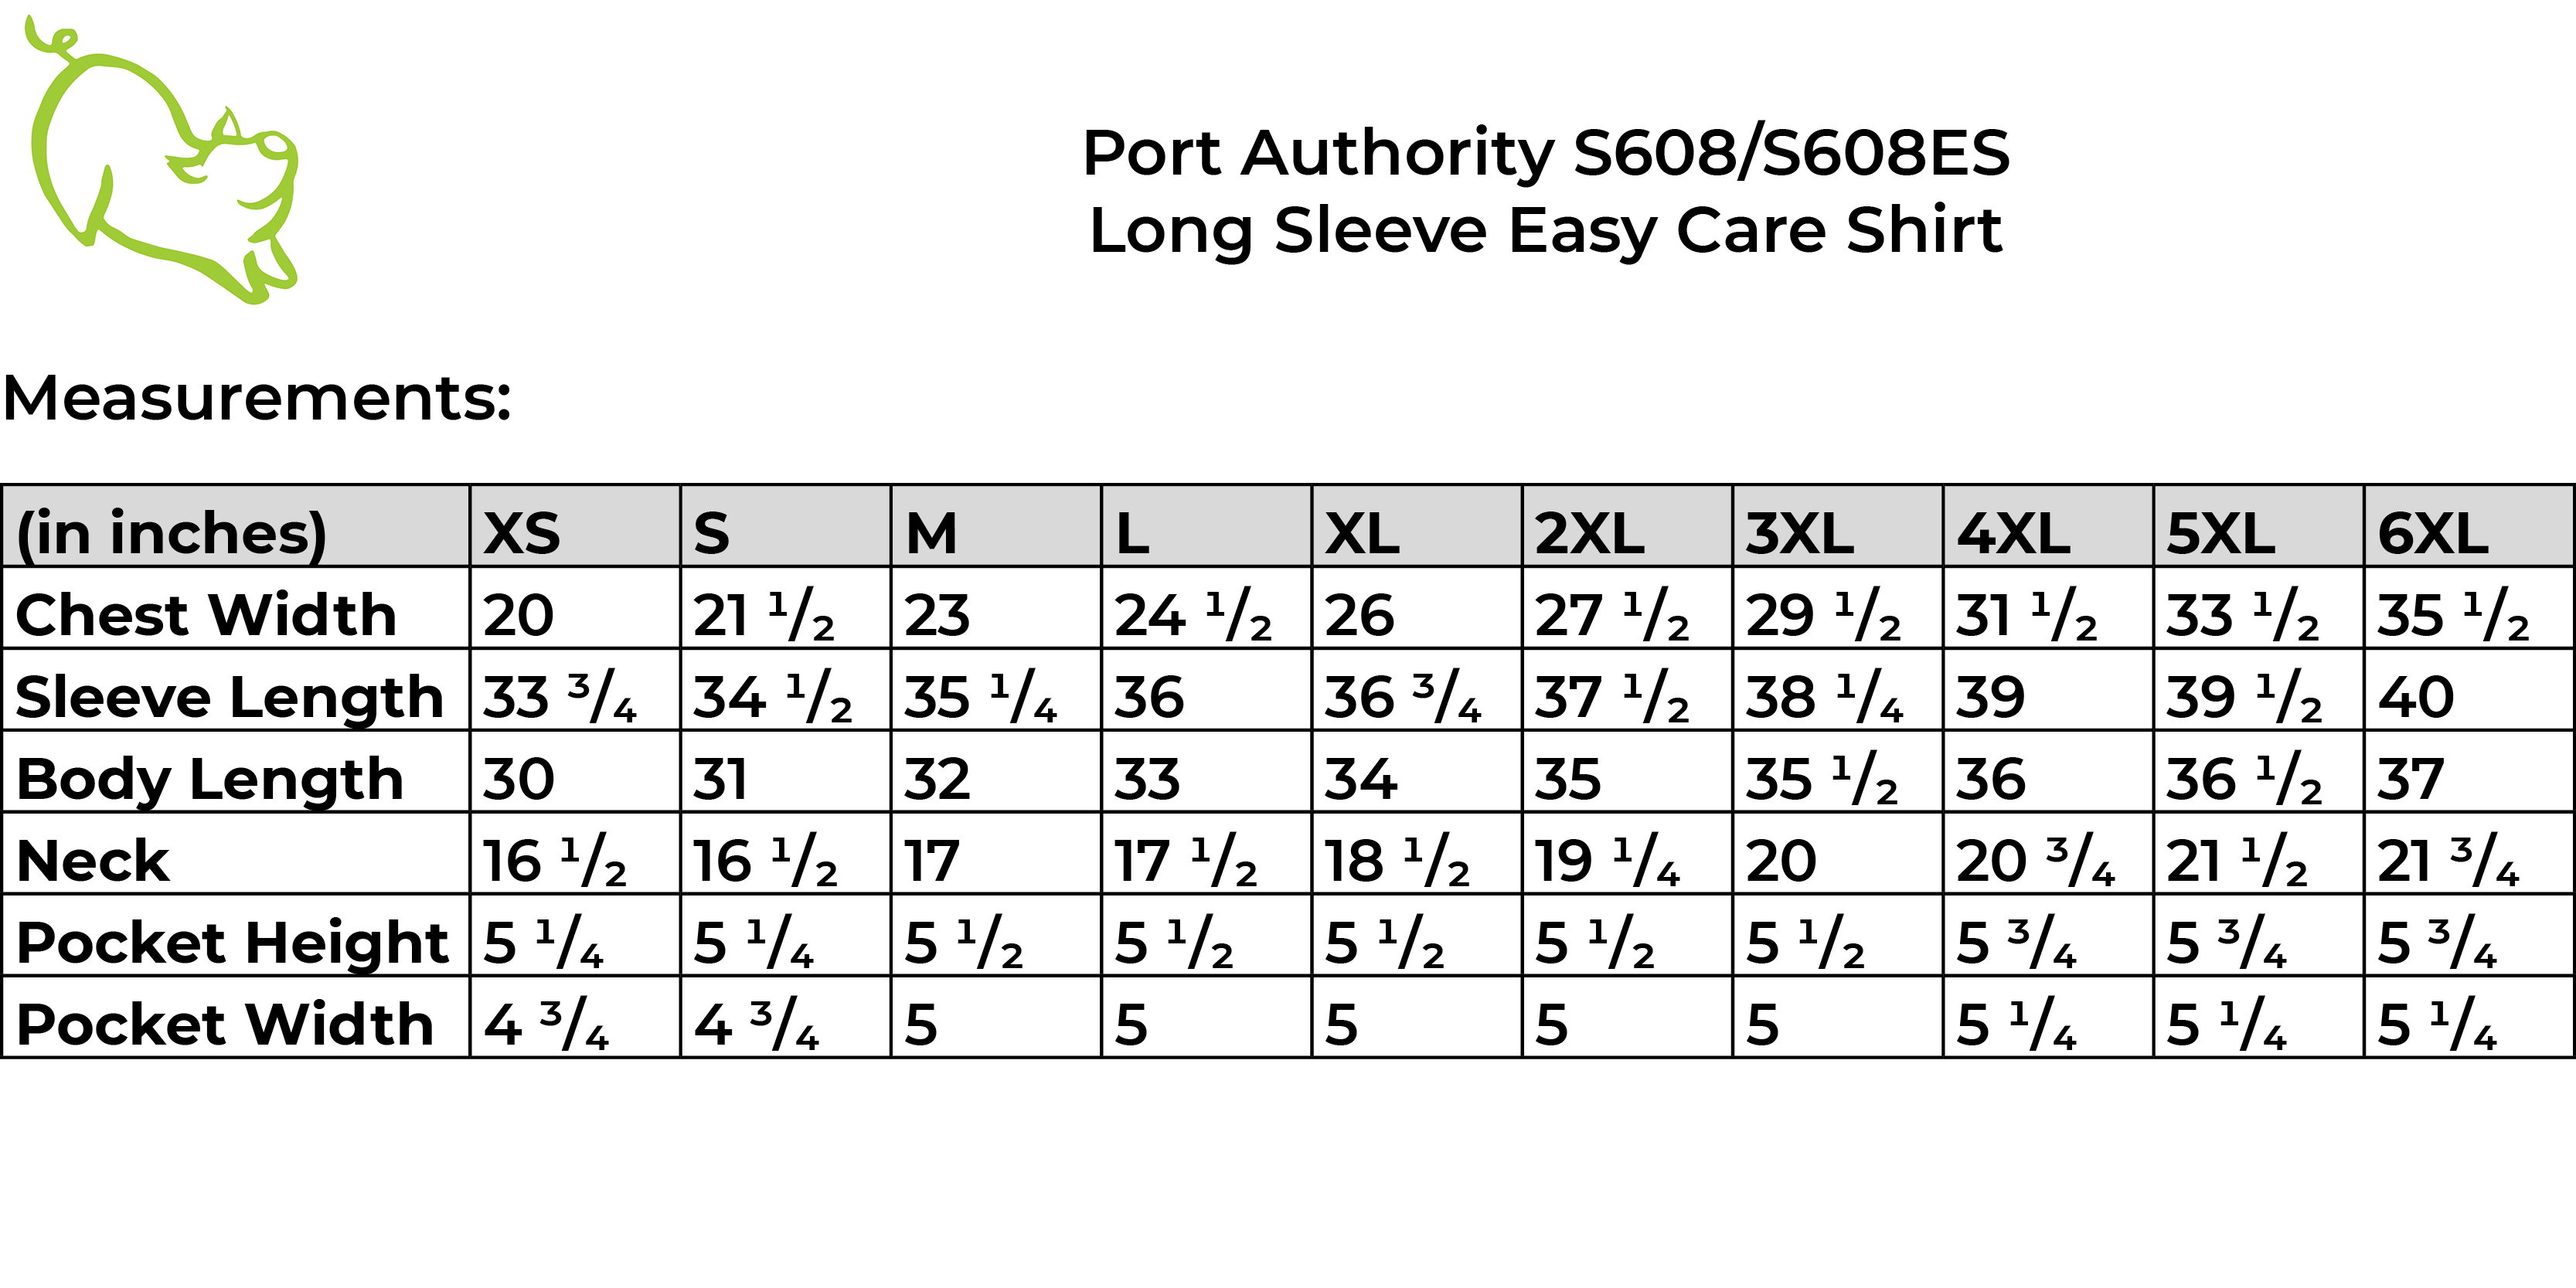 Port Authority S608 size guide